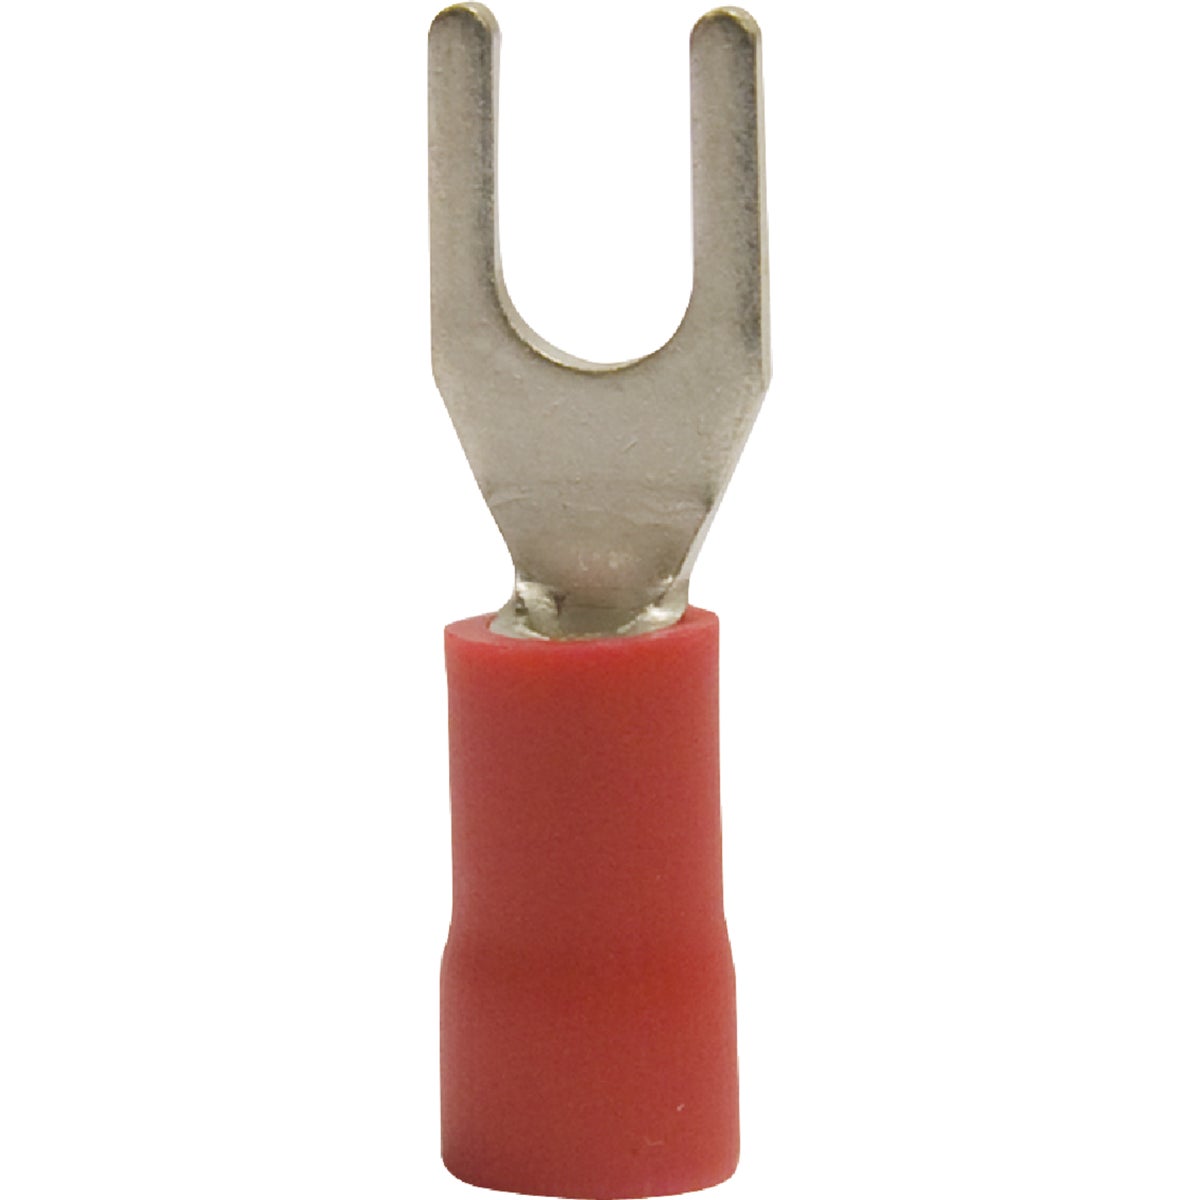 Item 509930, Vinyl-insulated barrel spade terminal for quick and reliable crimp-type 